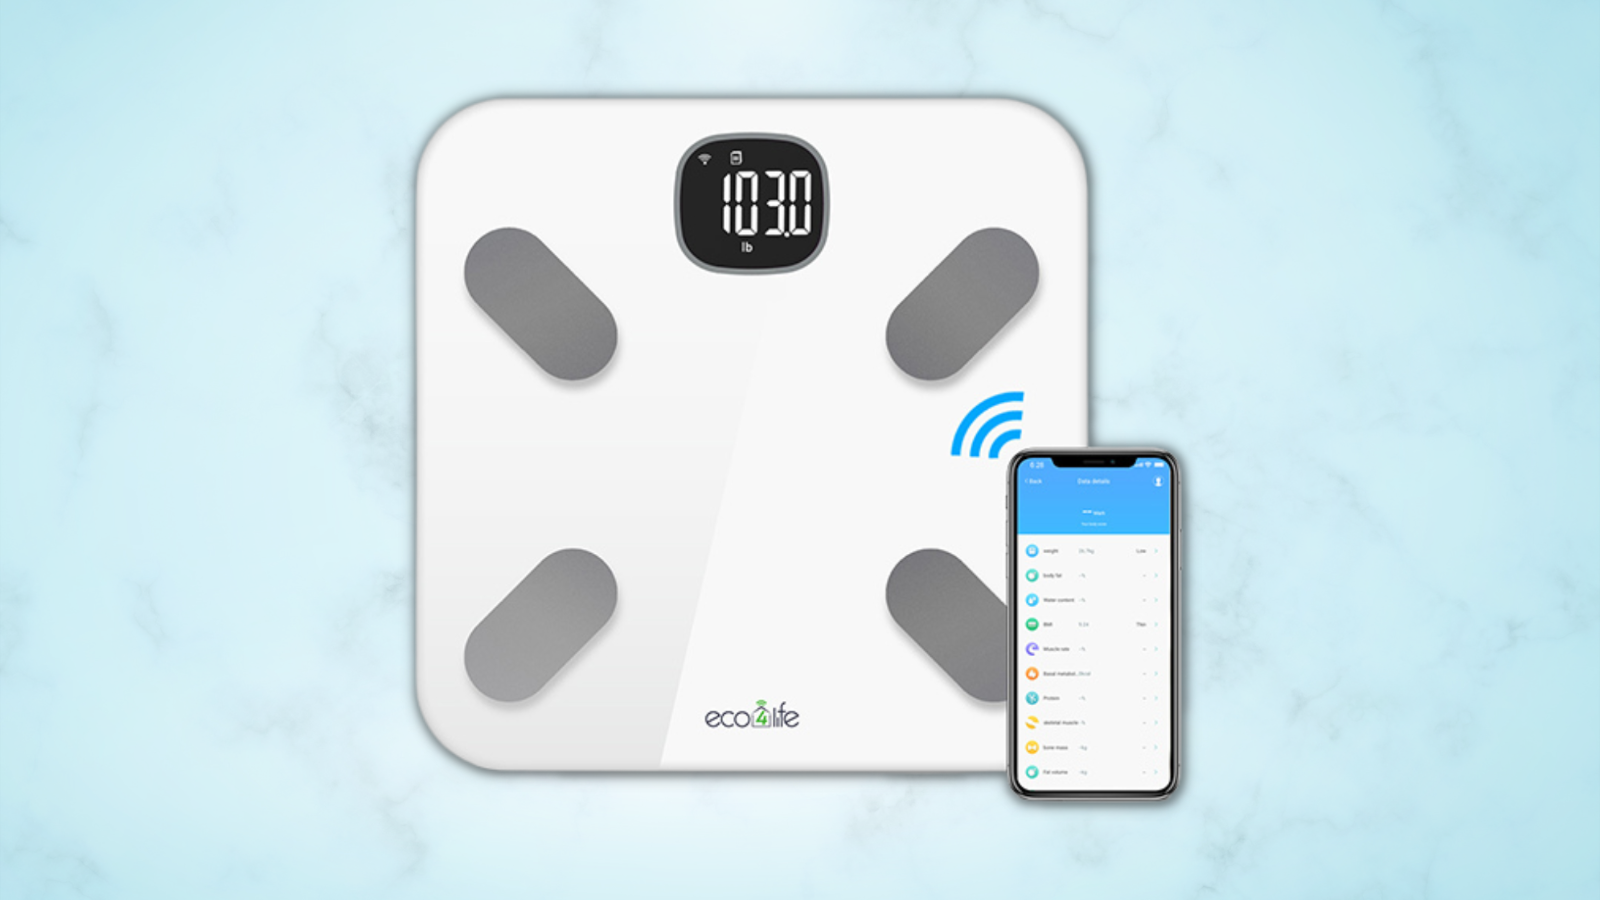 Stay informed about your body with this smart scale